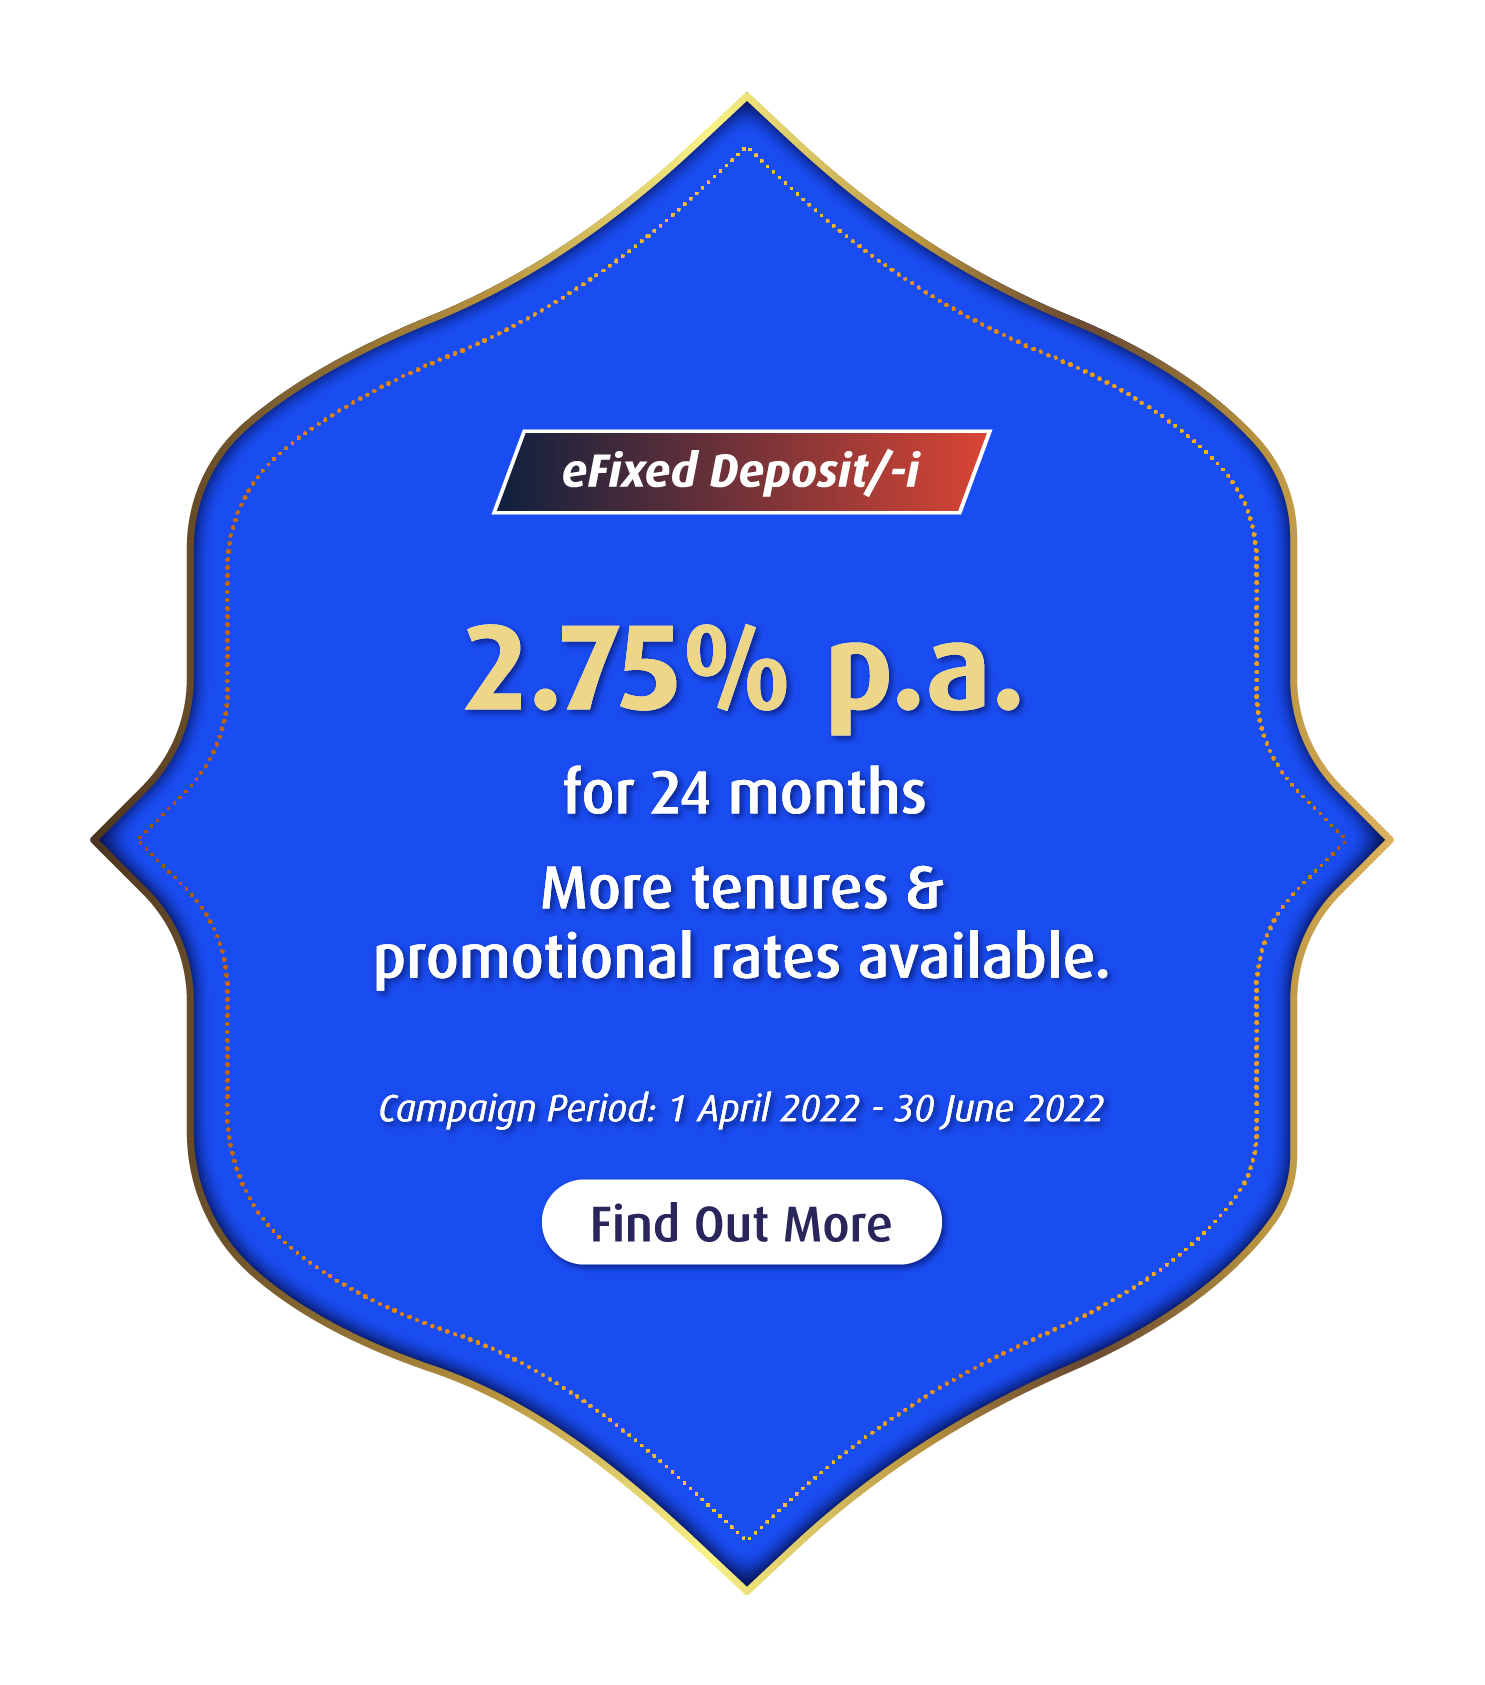 eFixed Deposit/-i 2.75% p.a. for 24 months